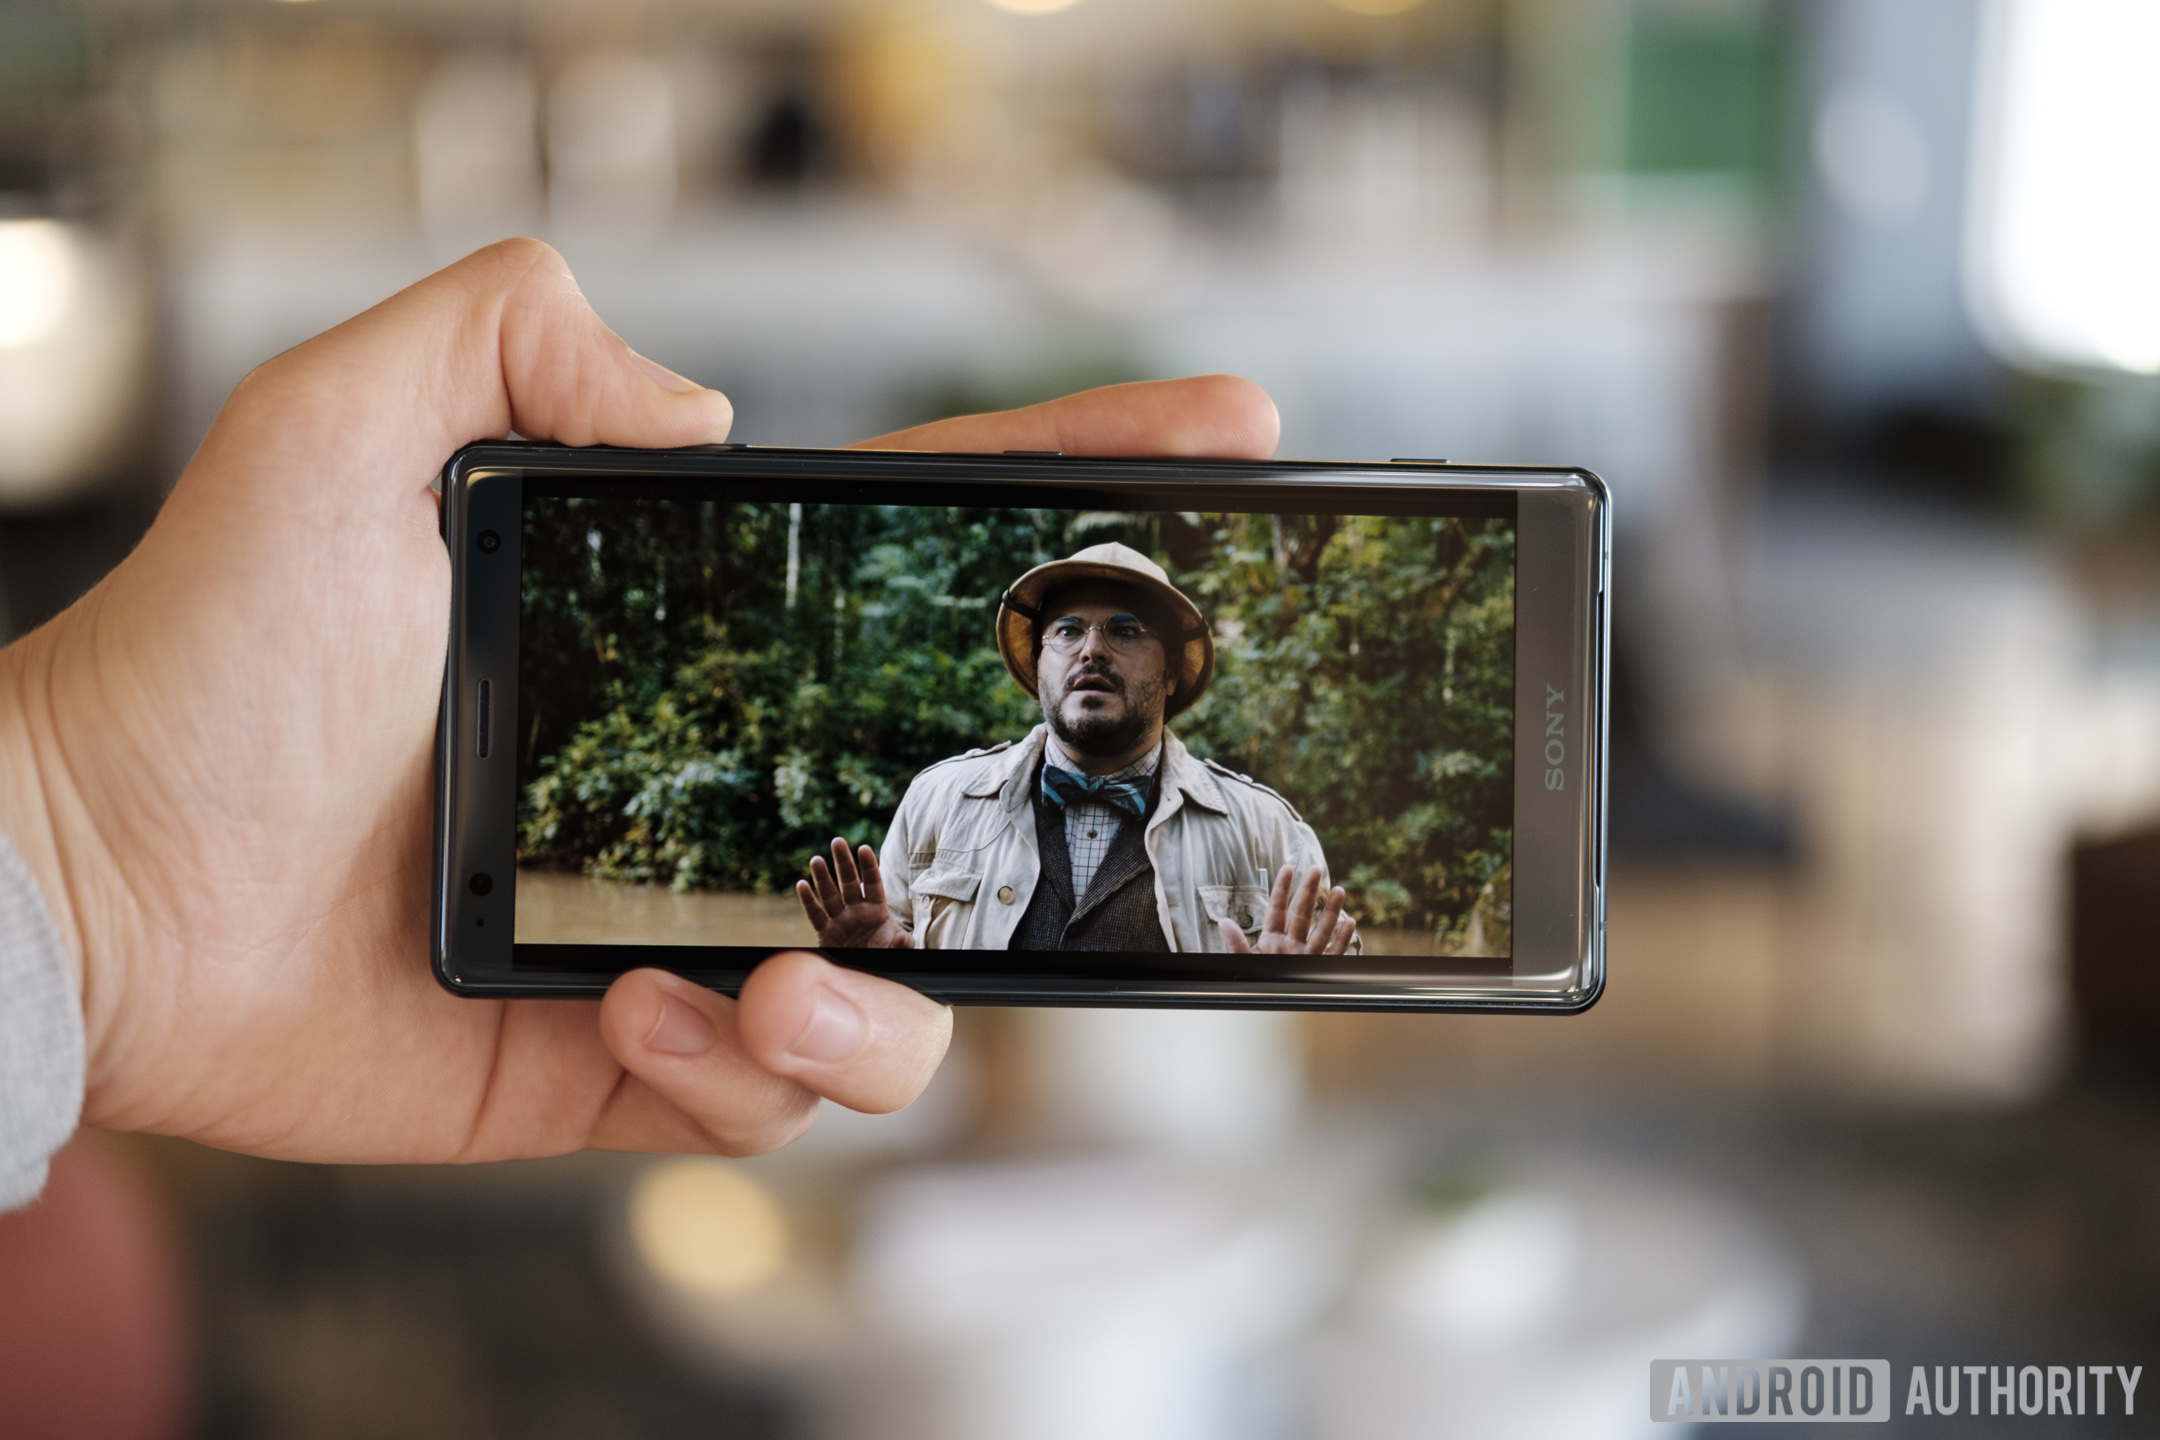 Sony Xperia XZ2 video reproduction quality